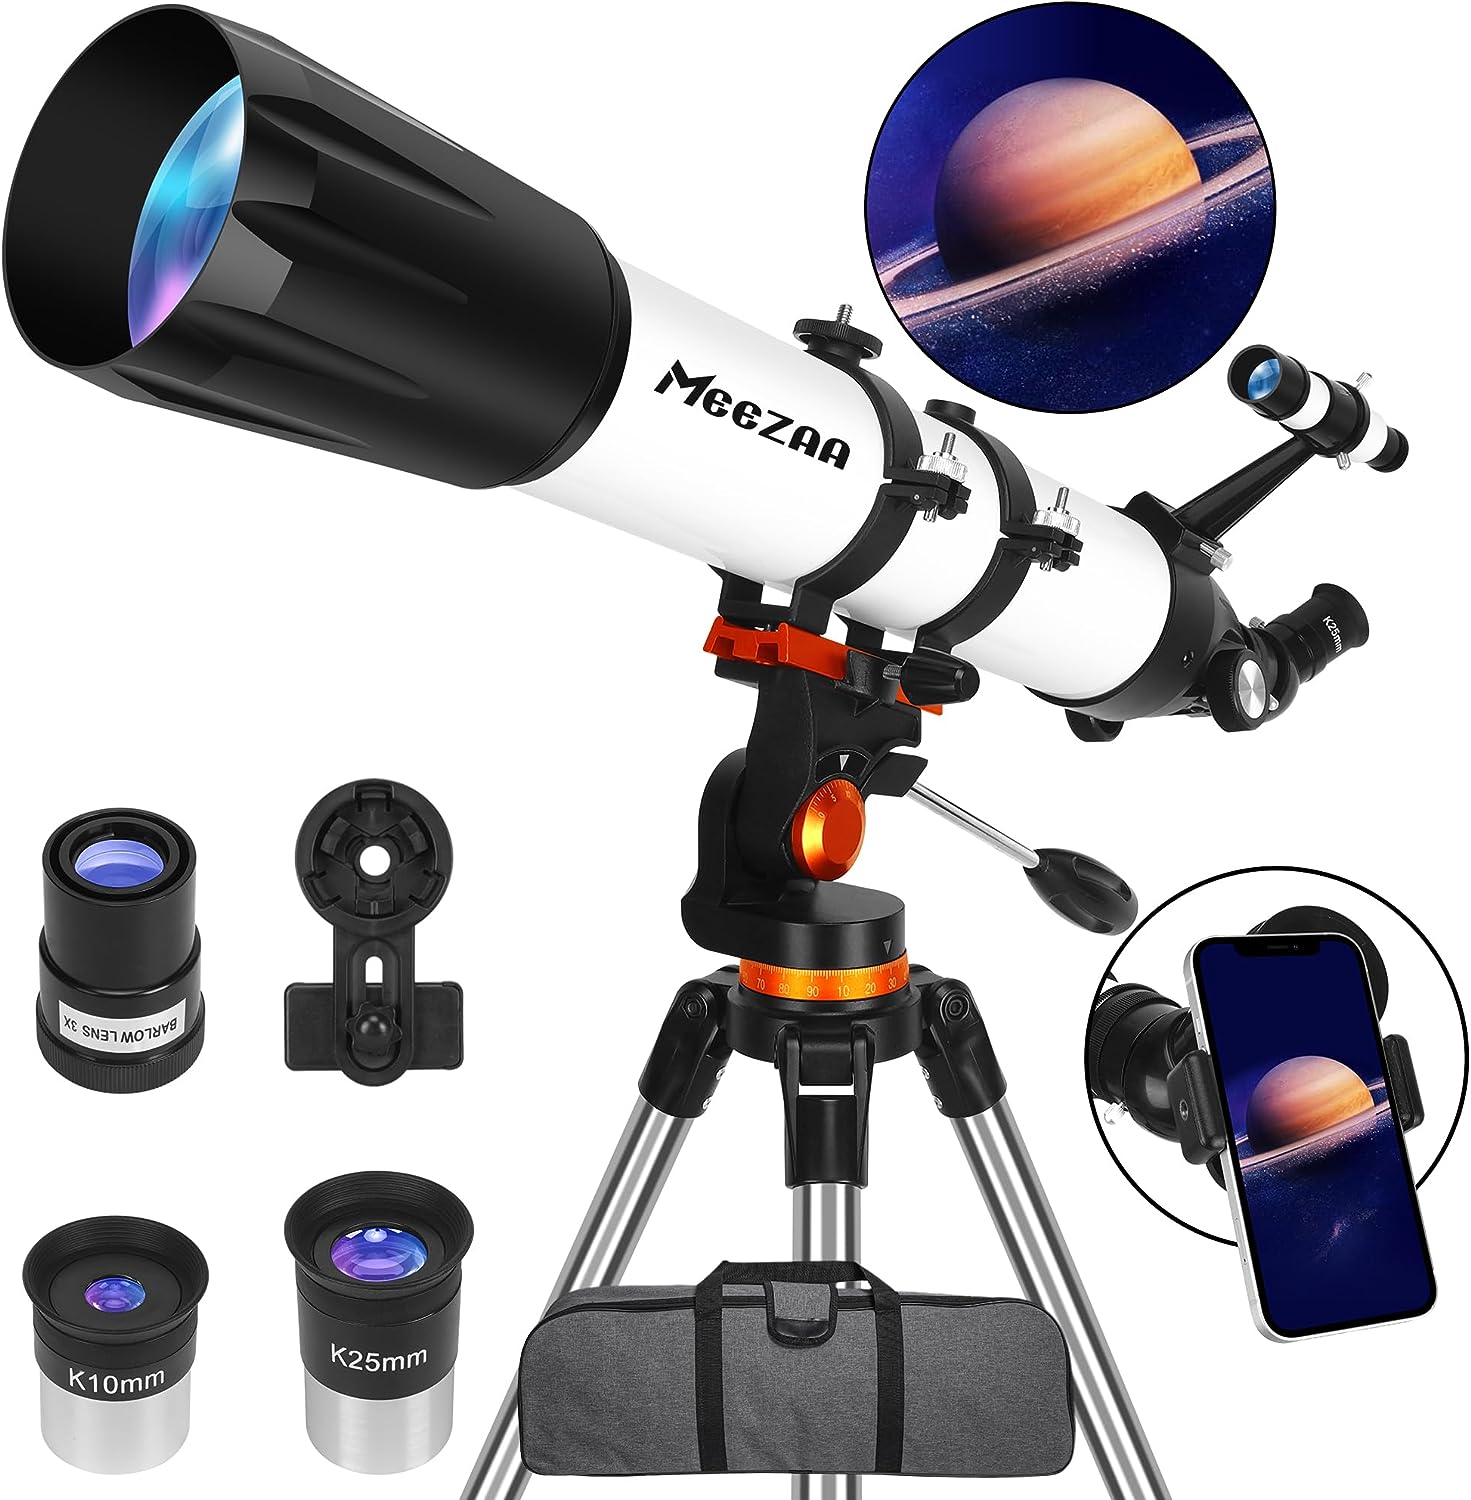 MEEZAA Telescope, Telescope for Adults Astronomy Professional, 90mm Aperture 800mm Refractor Telescope for Kids Beginners, Multi-Coated High Transmission Telescopes with Tripod Phone Adapter Carry Bag